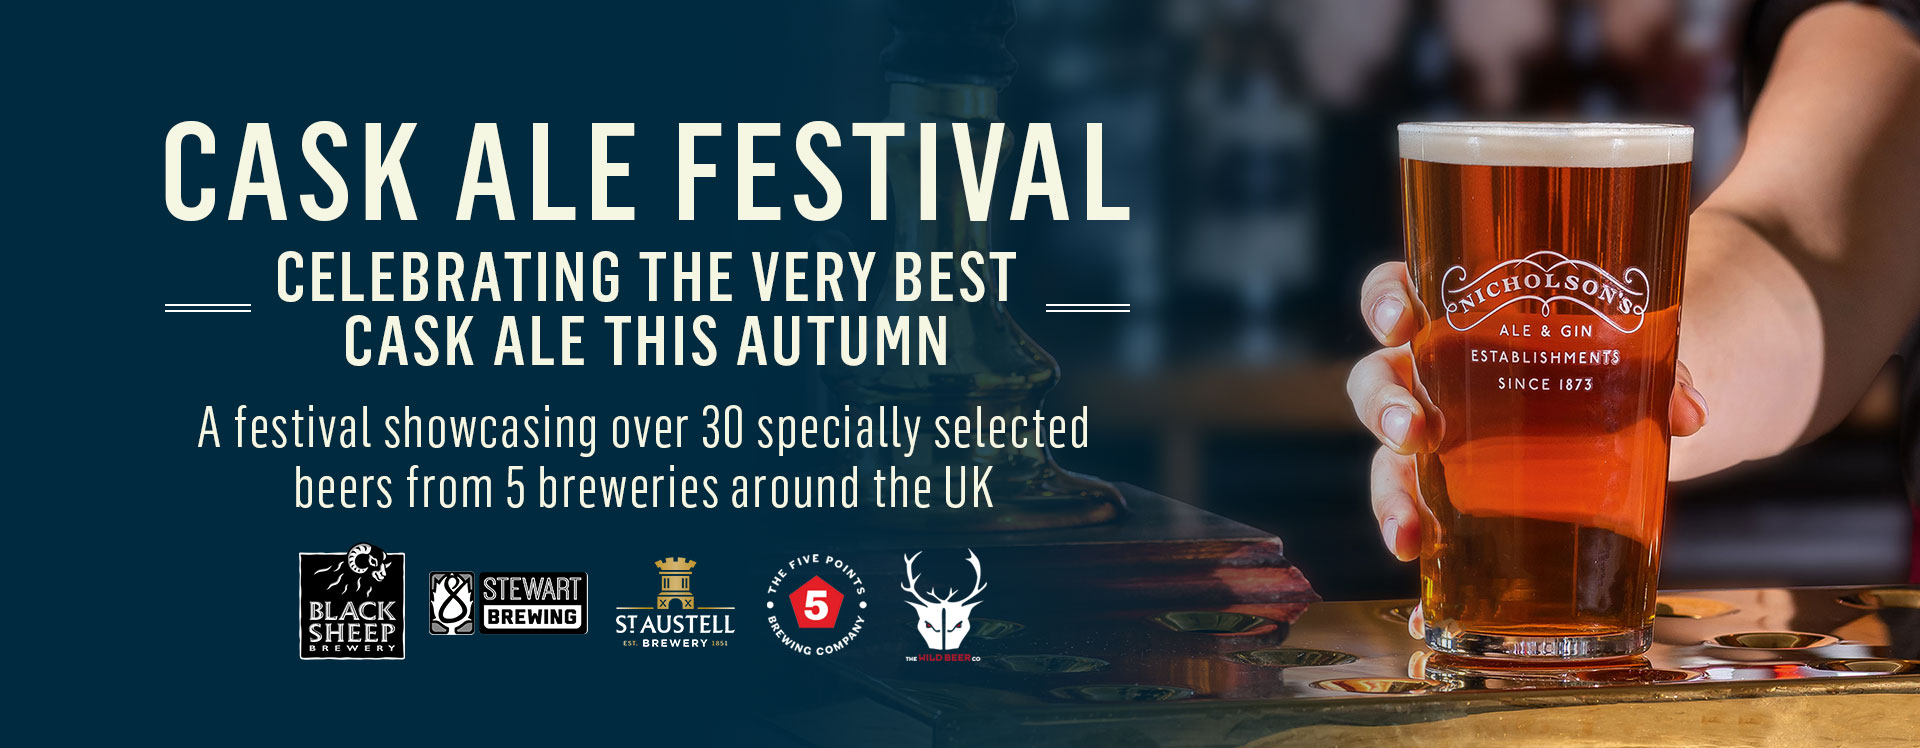 Autumn 2019 Cask Ale Festival Over 30 New Ales & Beers to Try!